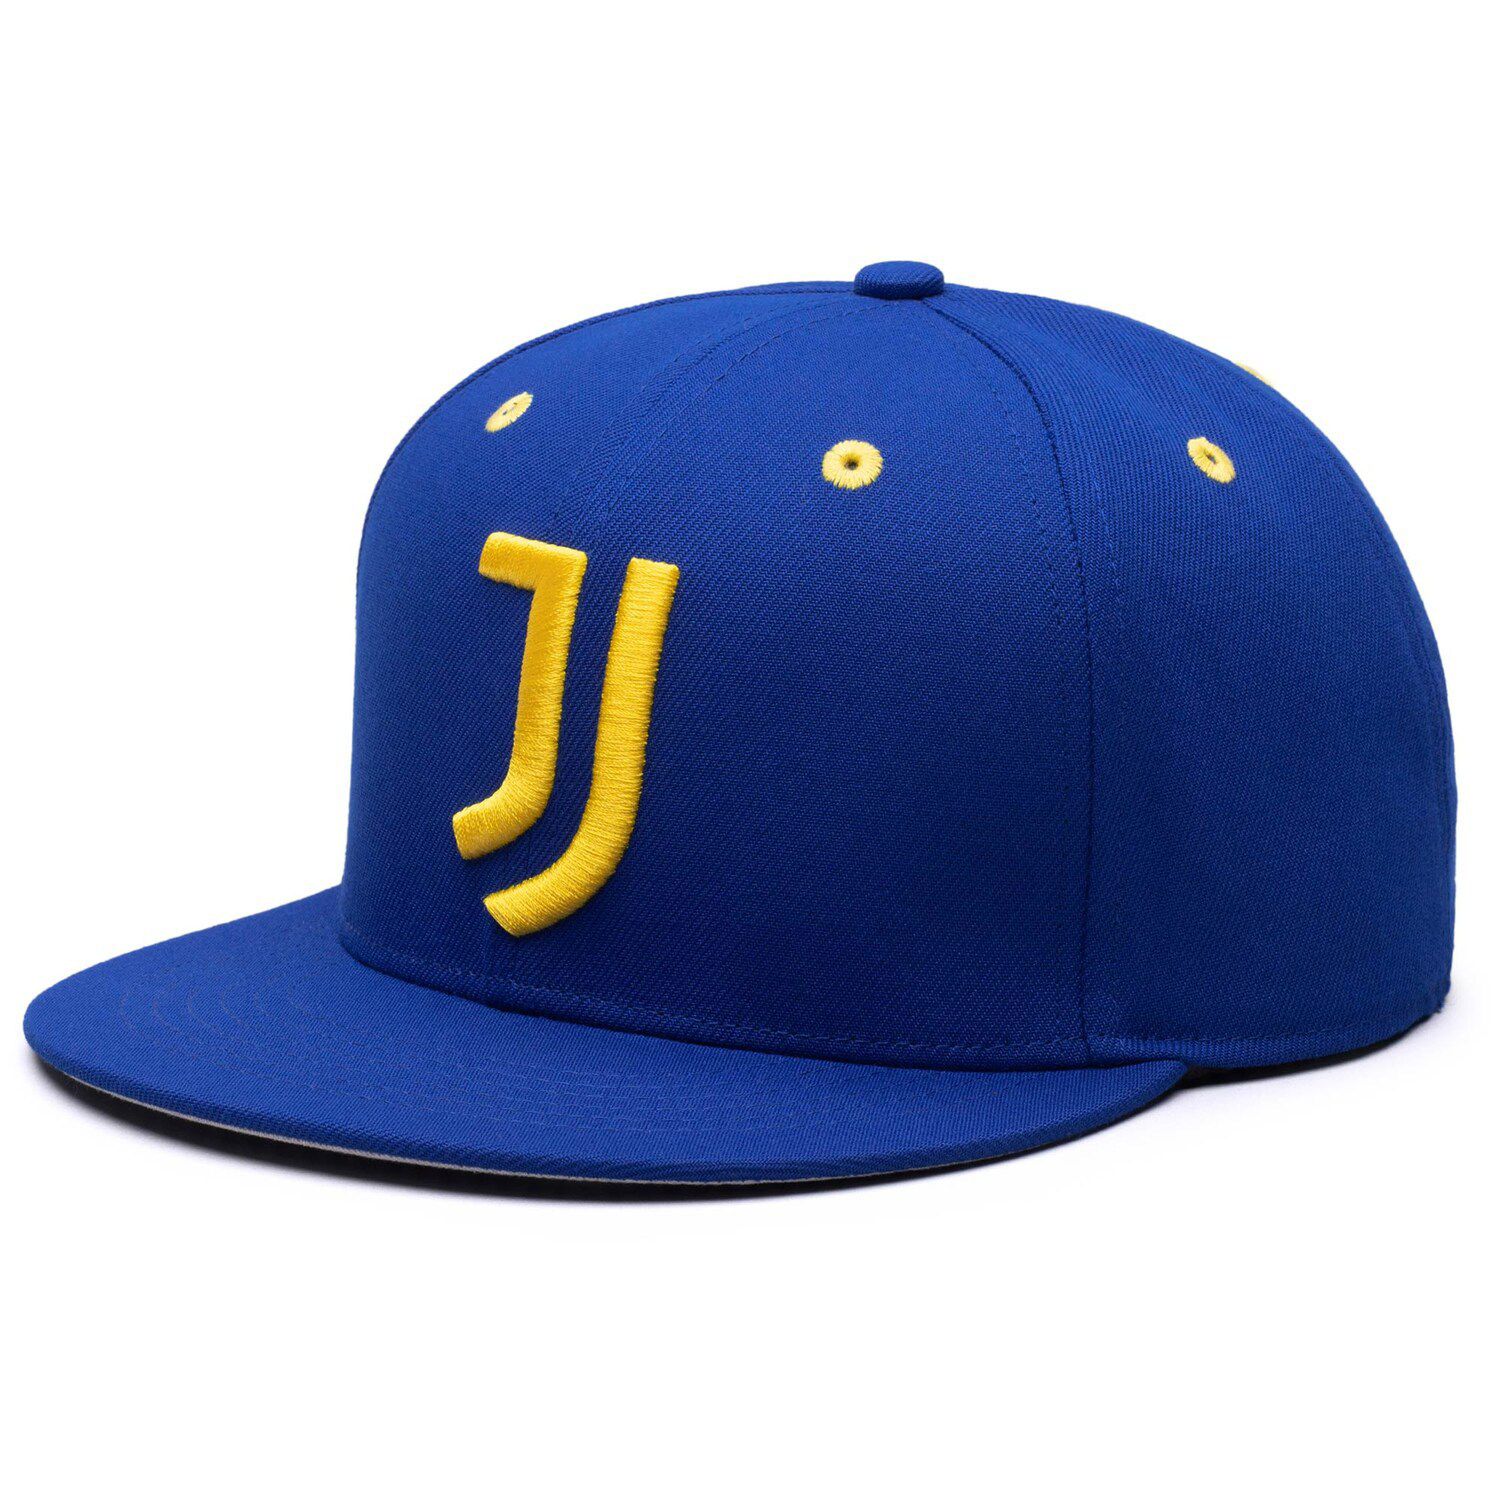 Image for Unbranded Men's Fi Collection Blue Juventus Retro Snapback Hat at Kohl's.